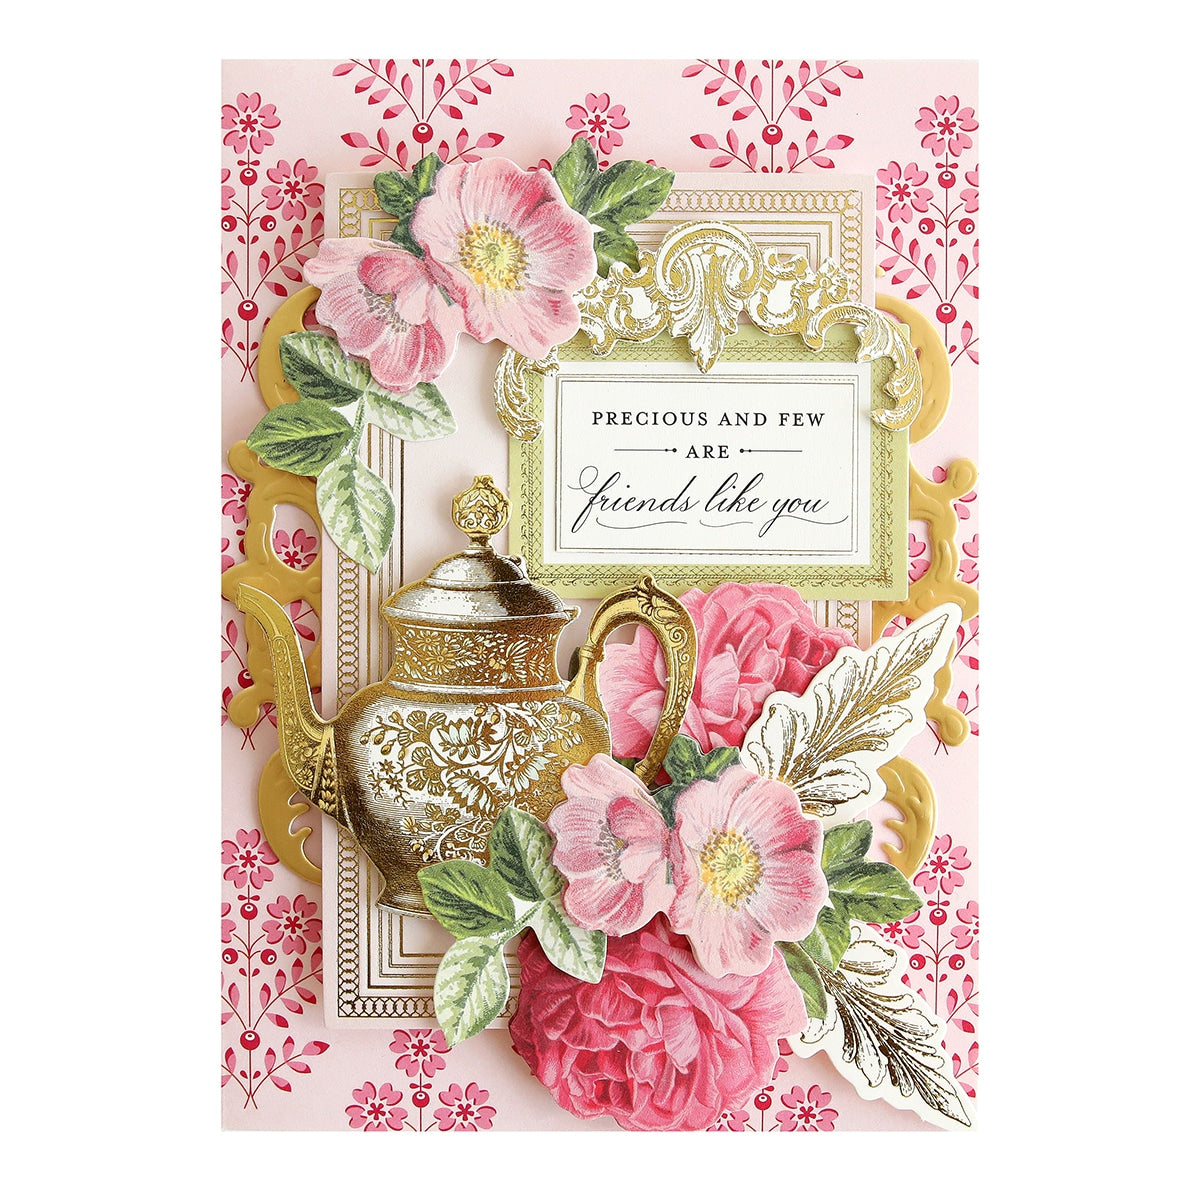 a card with pink flowers and a gold vase.